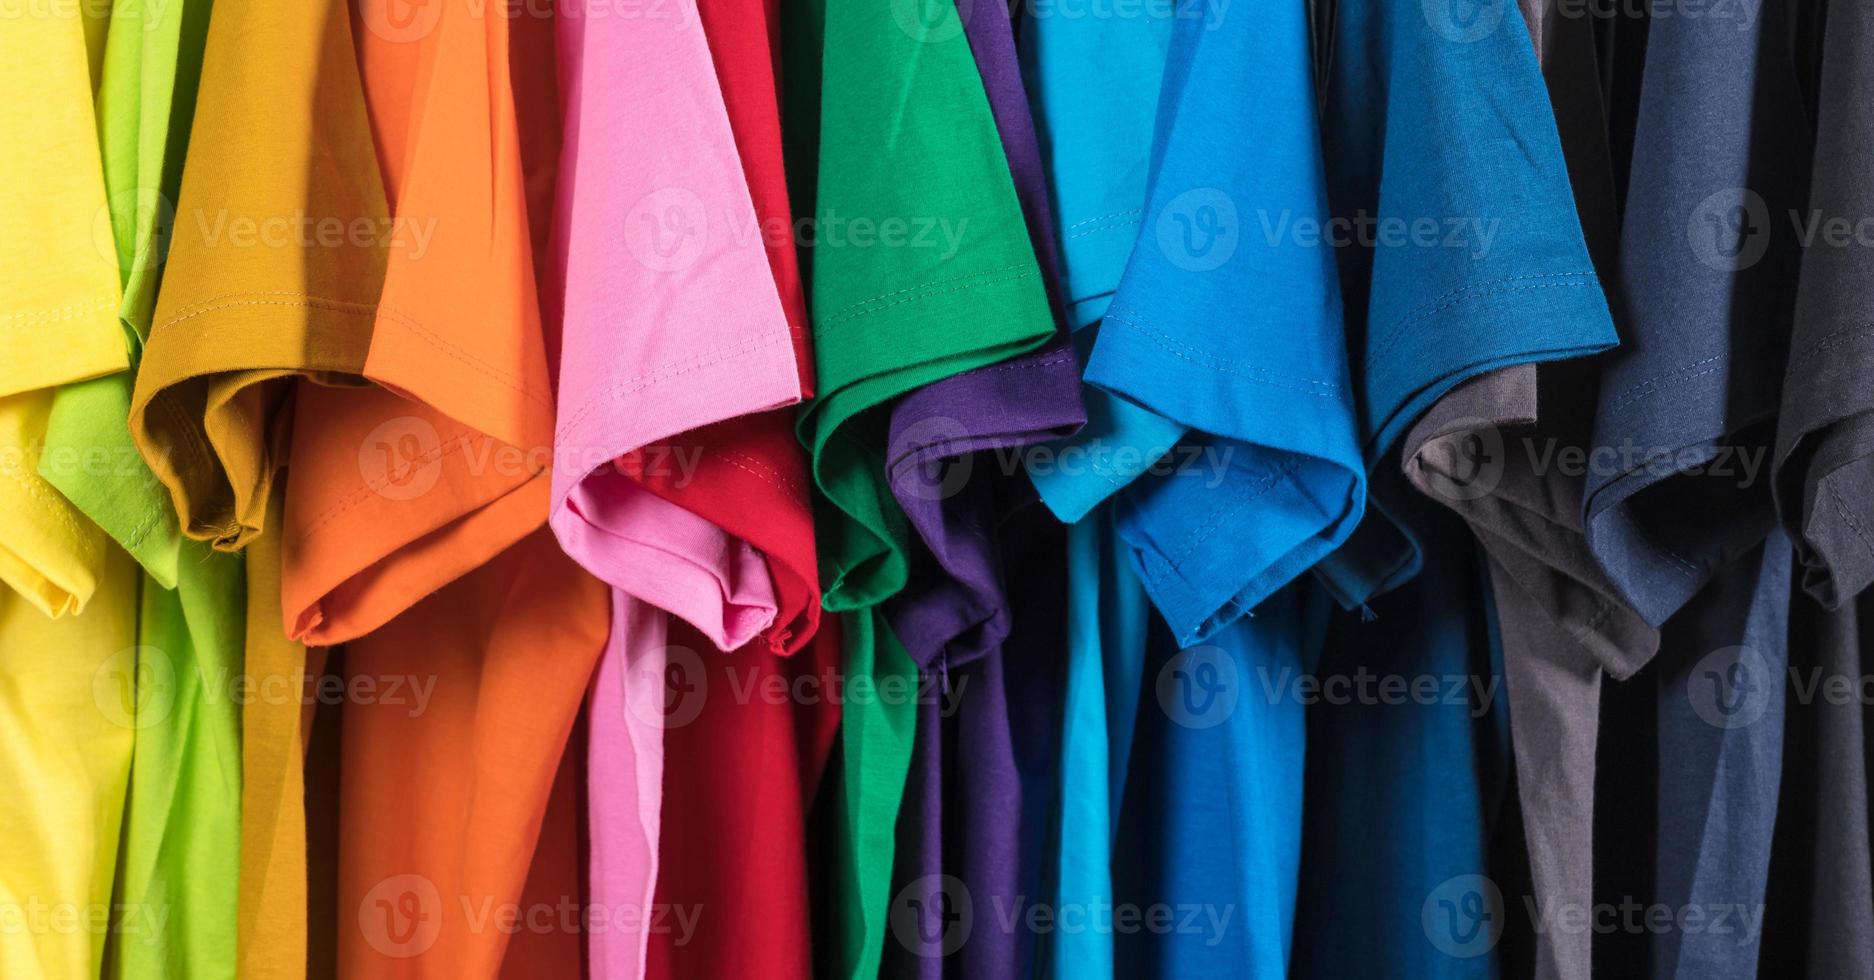 Colorful t-shirts hanging on a rack photo